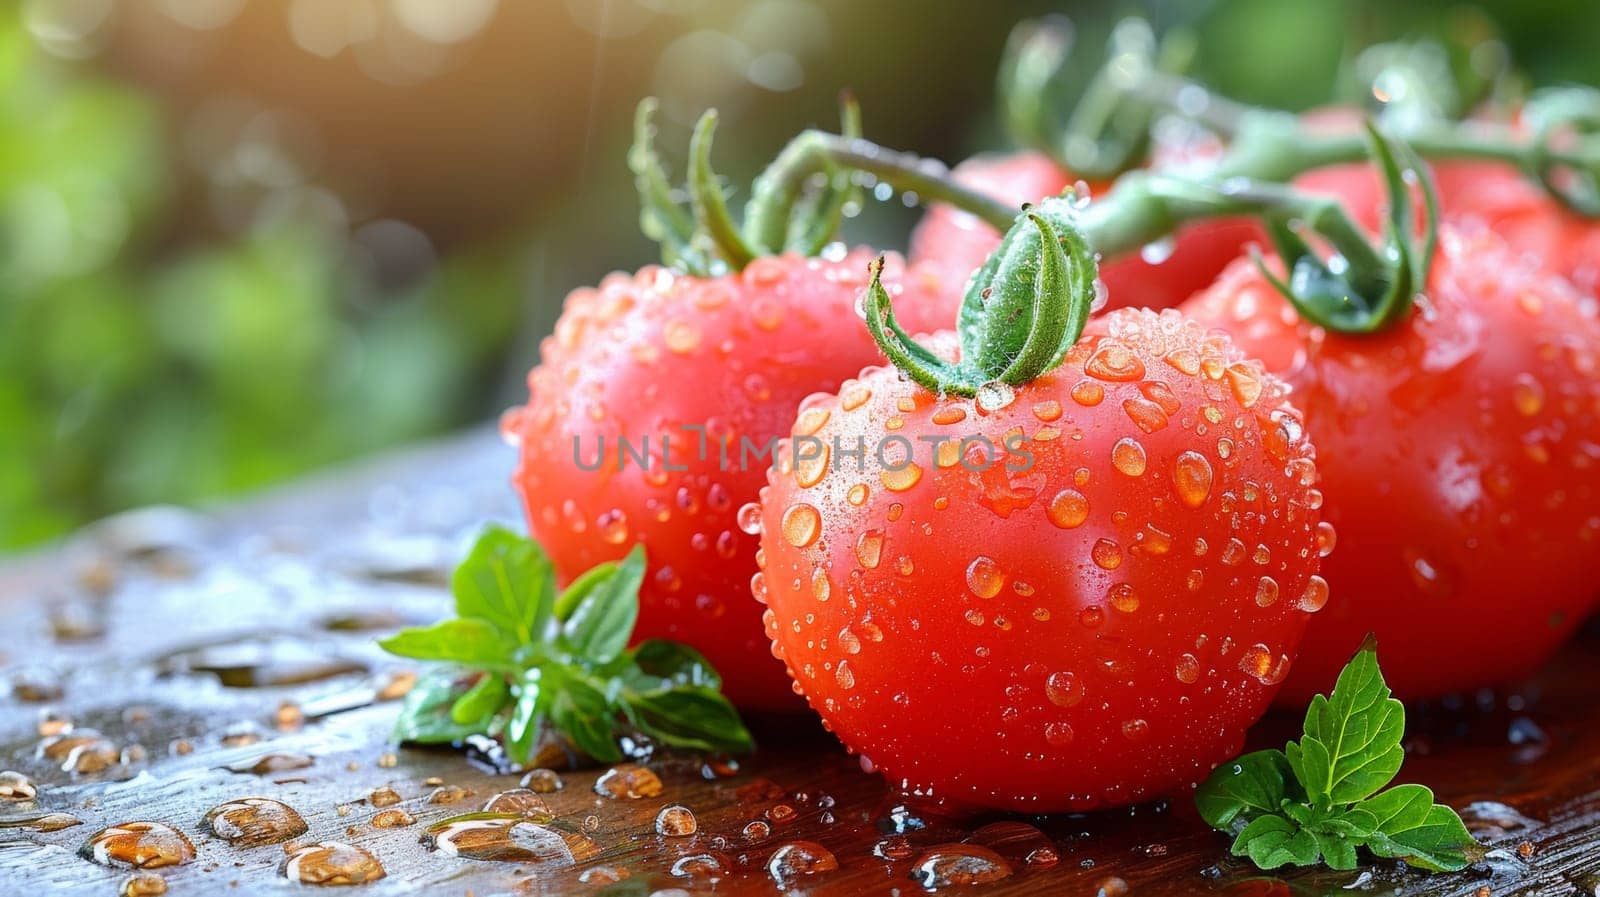 A bunch of tomatoes with water droplets on them sitting next to some leaves, AI by starush